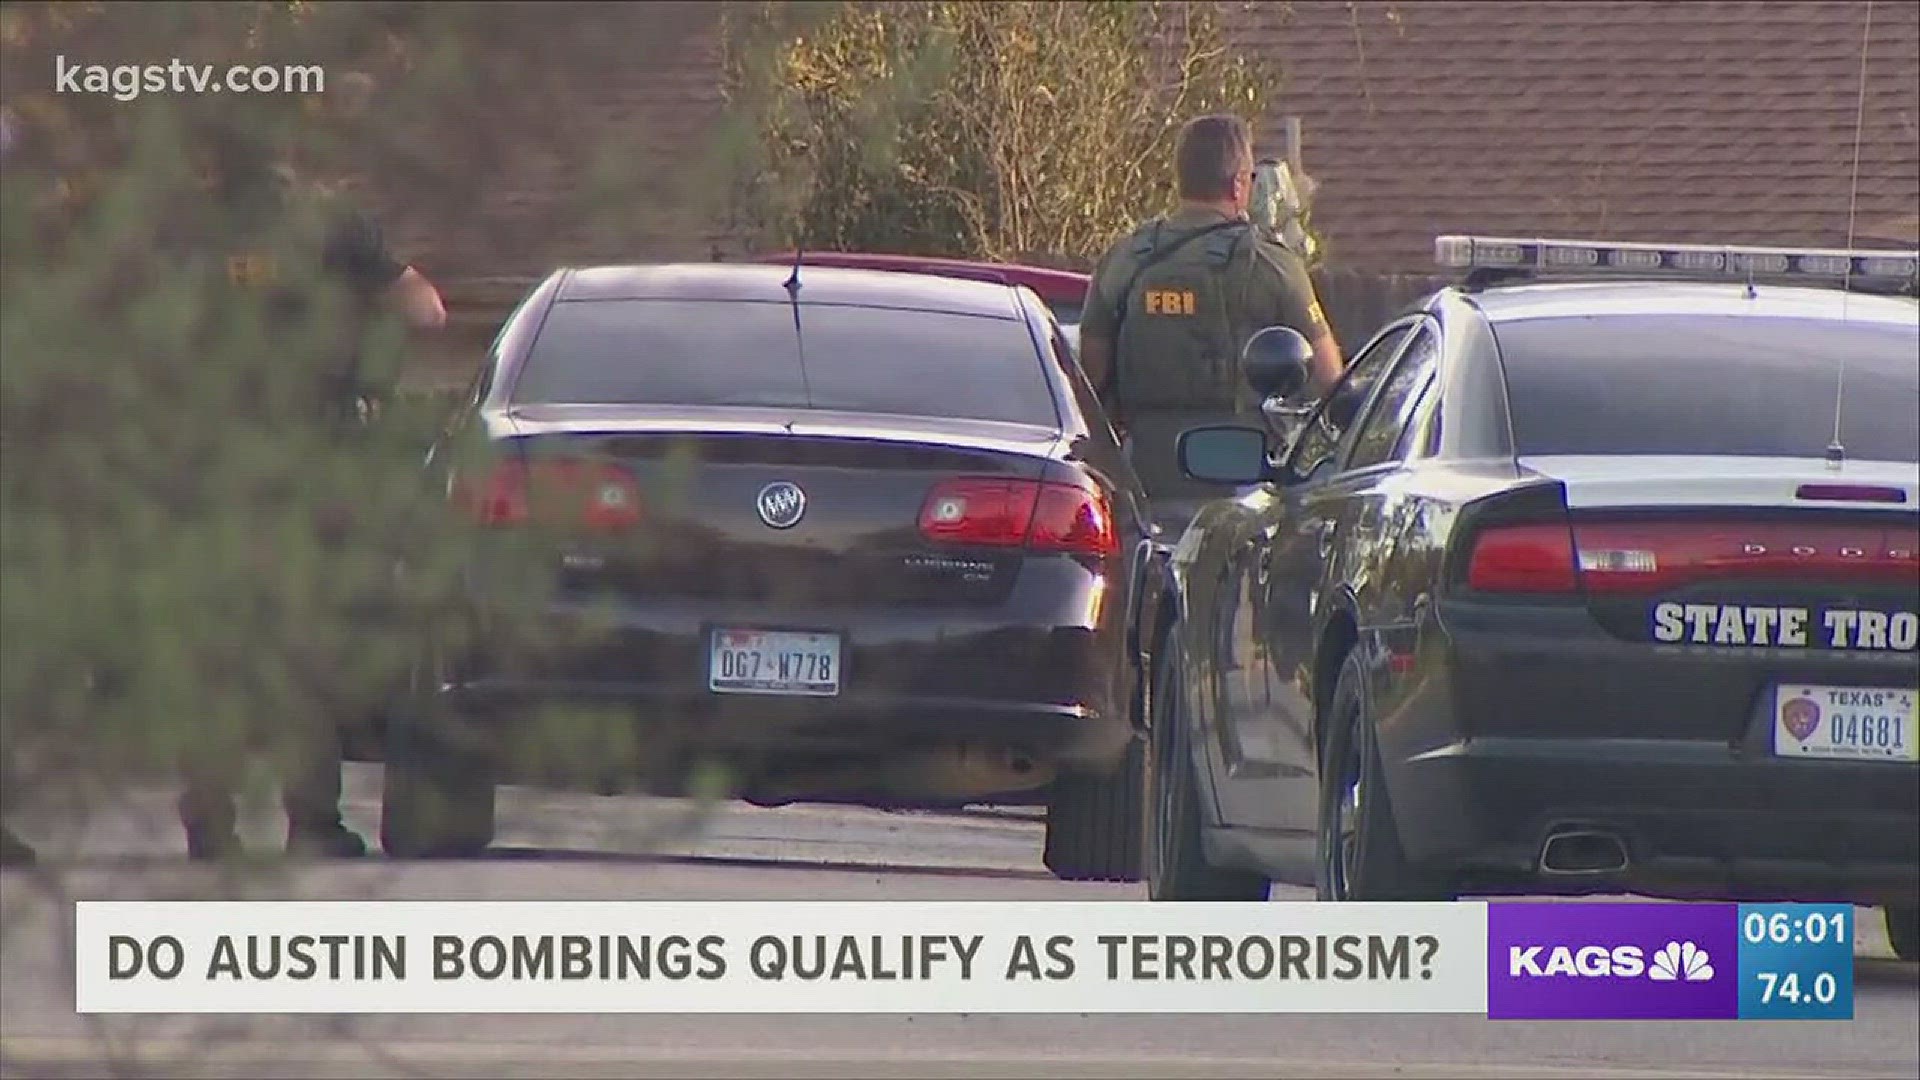 While police now know who the bomber was, they still do not know what his motives were for the bombings. Would you consider it terrorism? We wanted to know what crimes are considered acts of terrorism, and motive plays a key role in that determination.